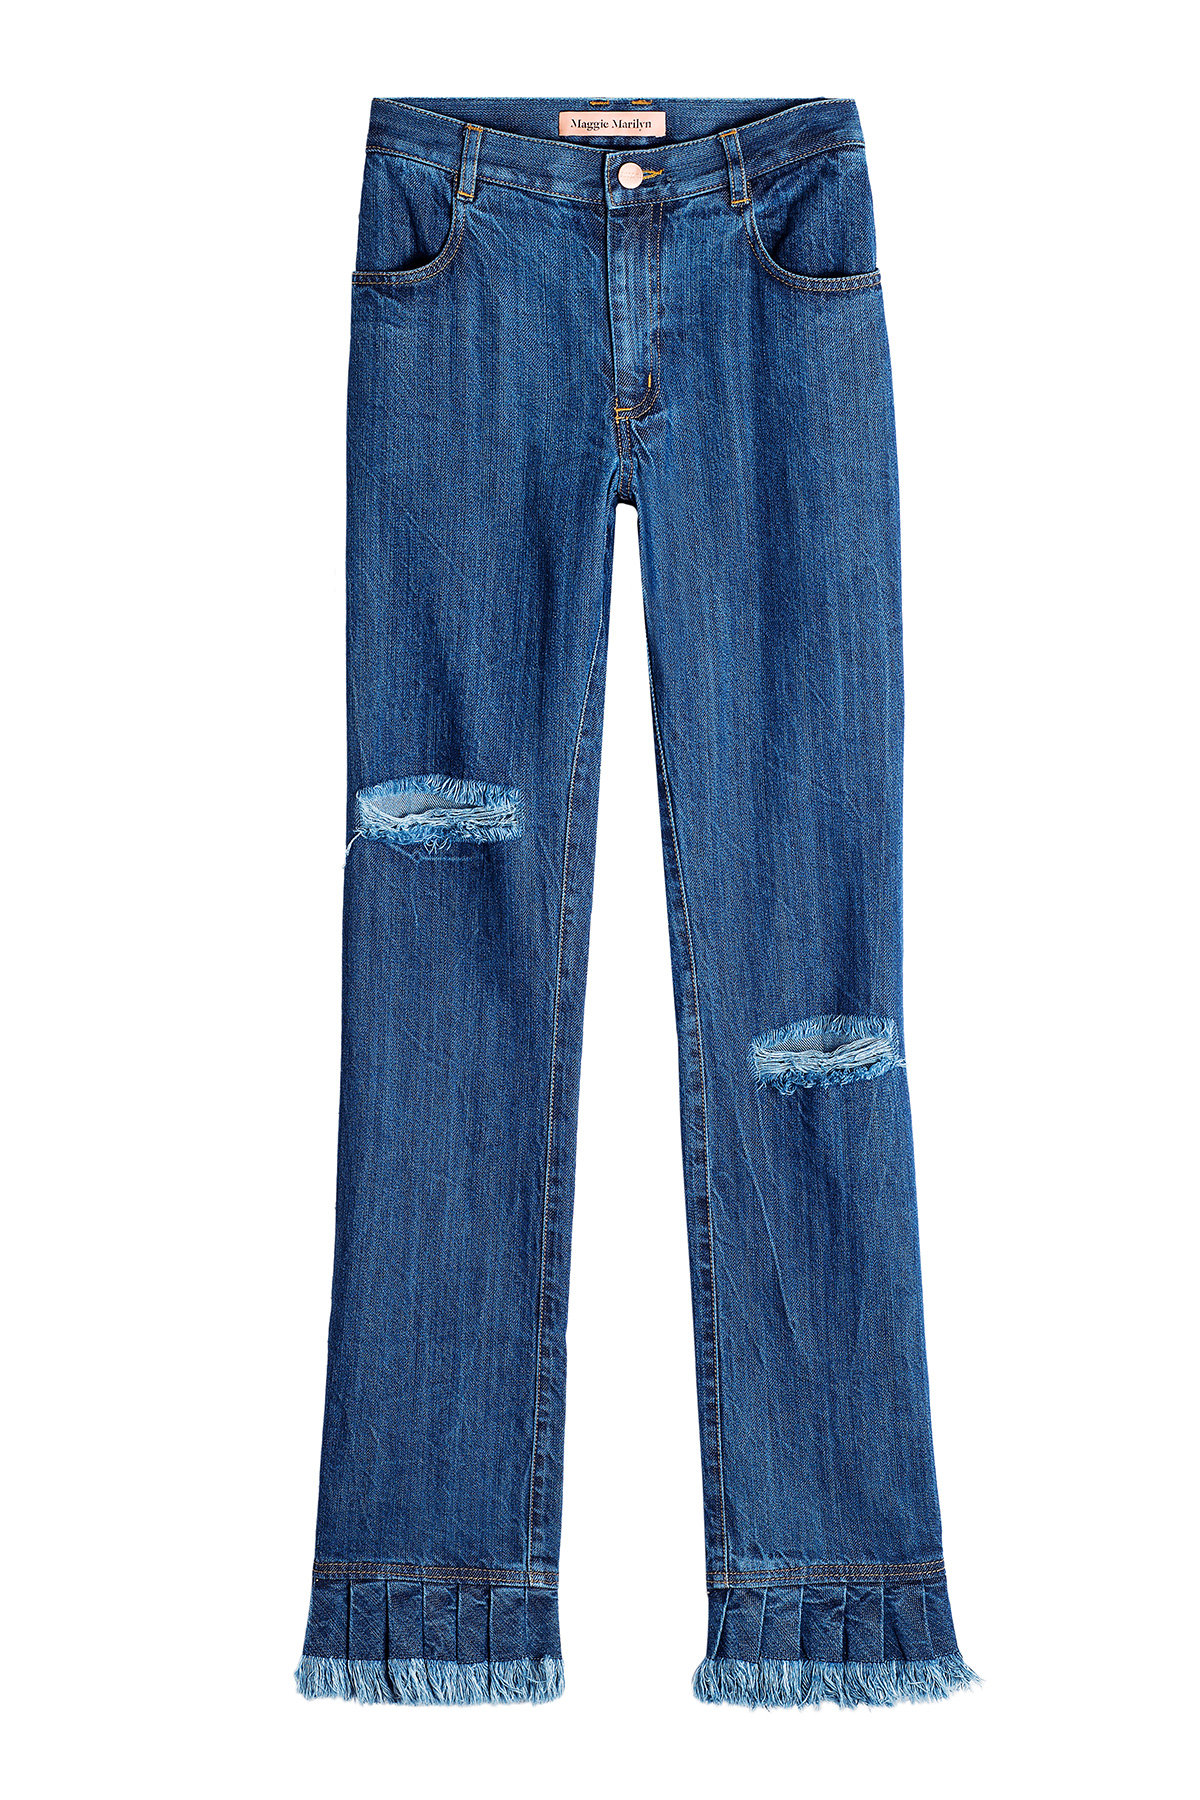 Maggie Marilyn - Stonewashed Flare Jeans